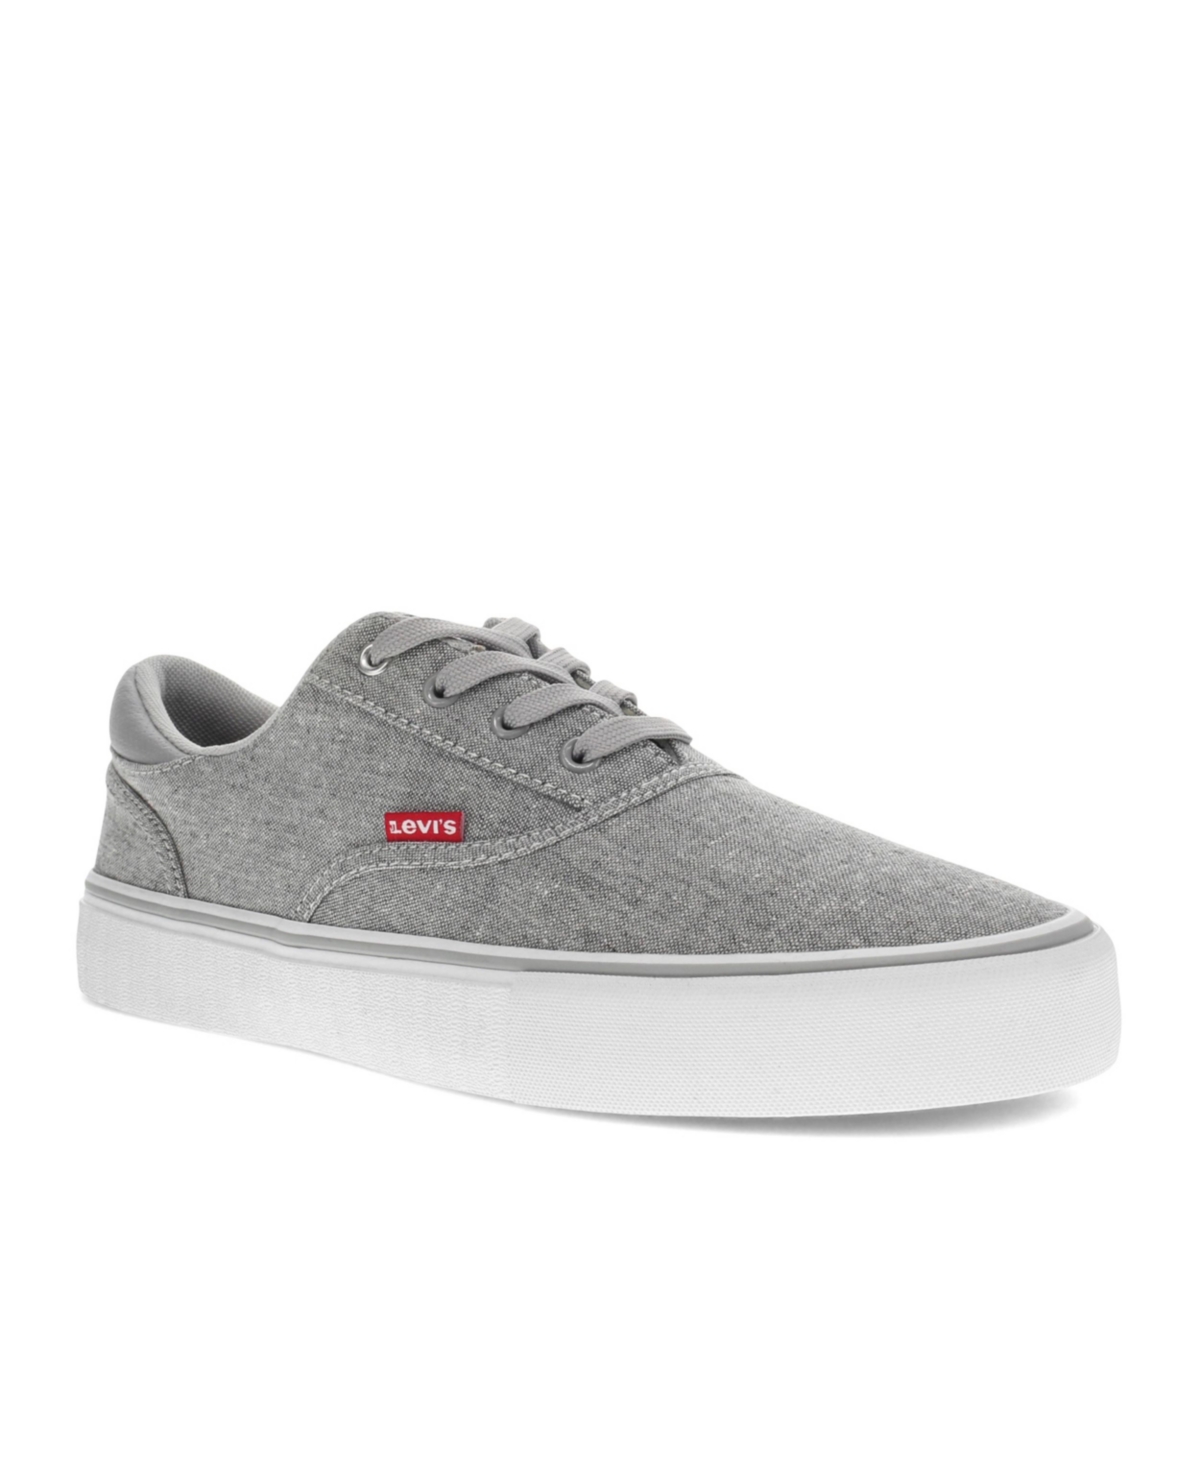 LEVI'S MEN'S ETHAN S CHAMBRAY LACE-UP SNEAKERS